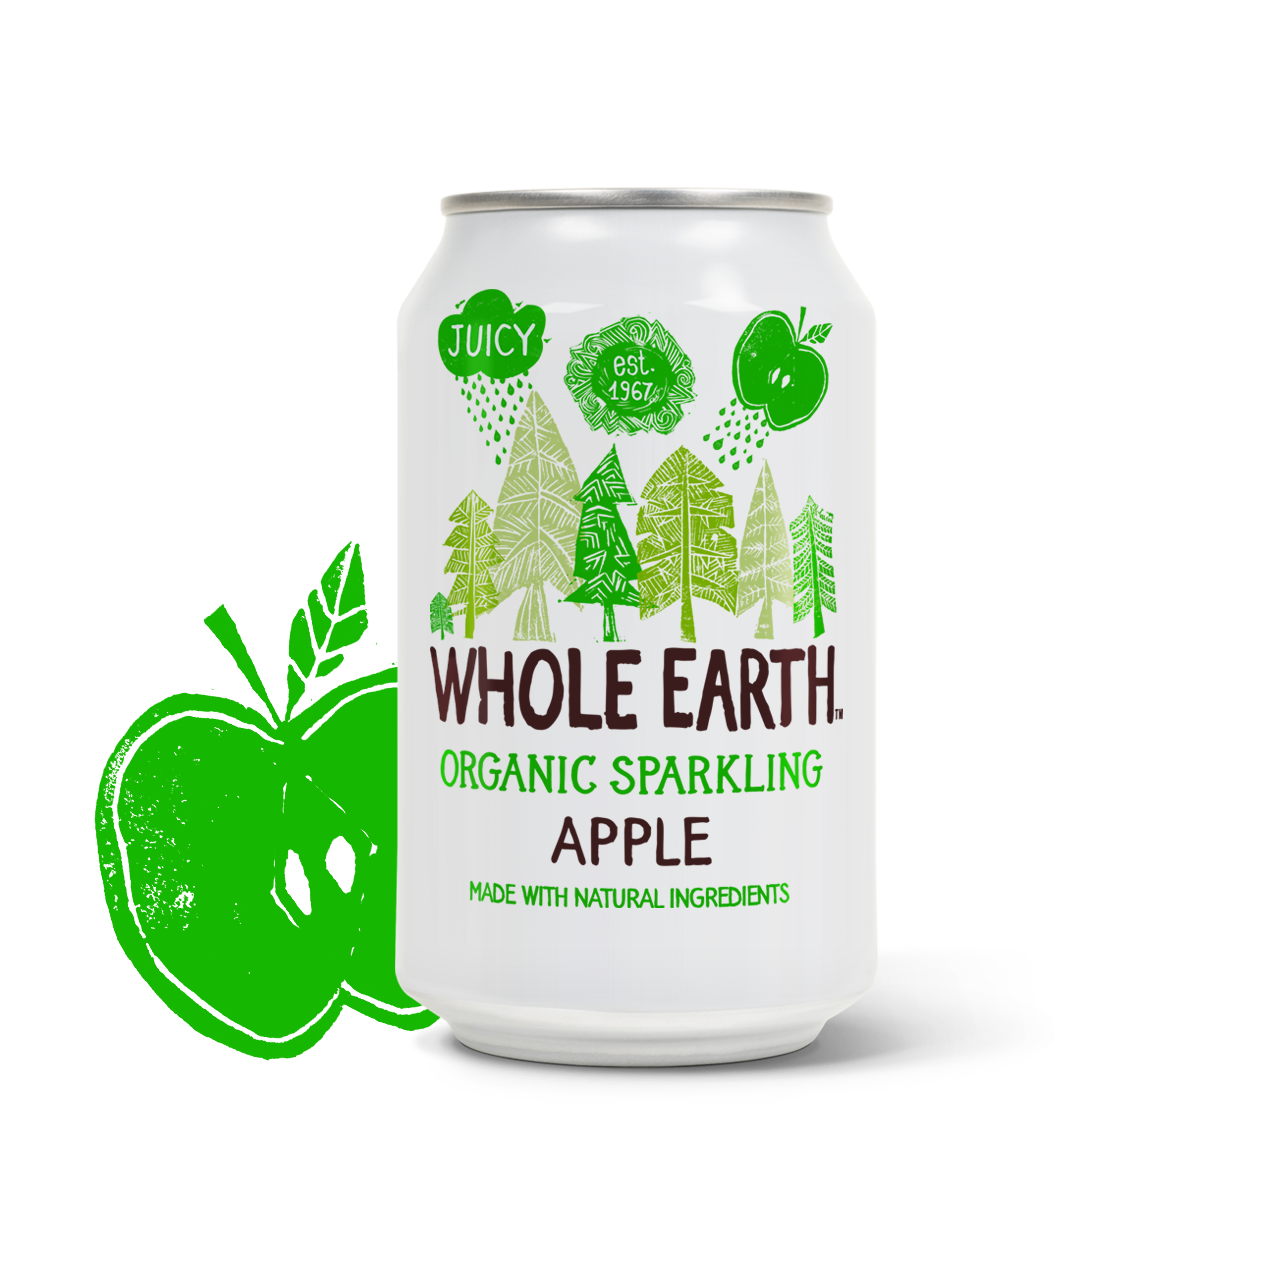 Whole Earth Lightly Sparkling Organic Apple Drink 330ml - Just Natural